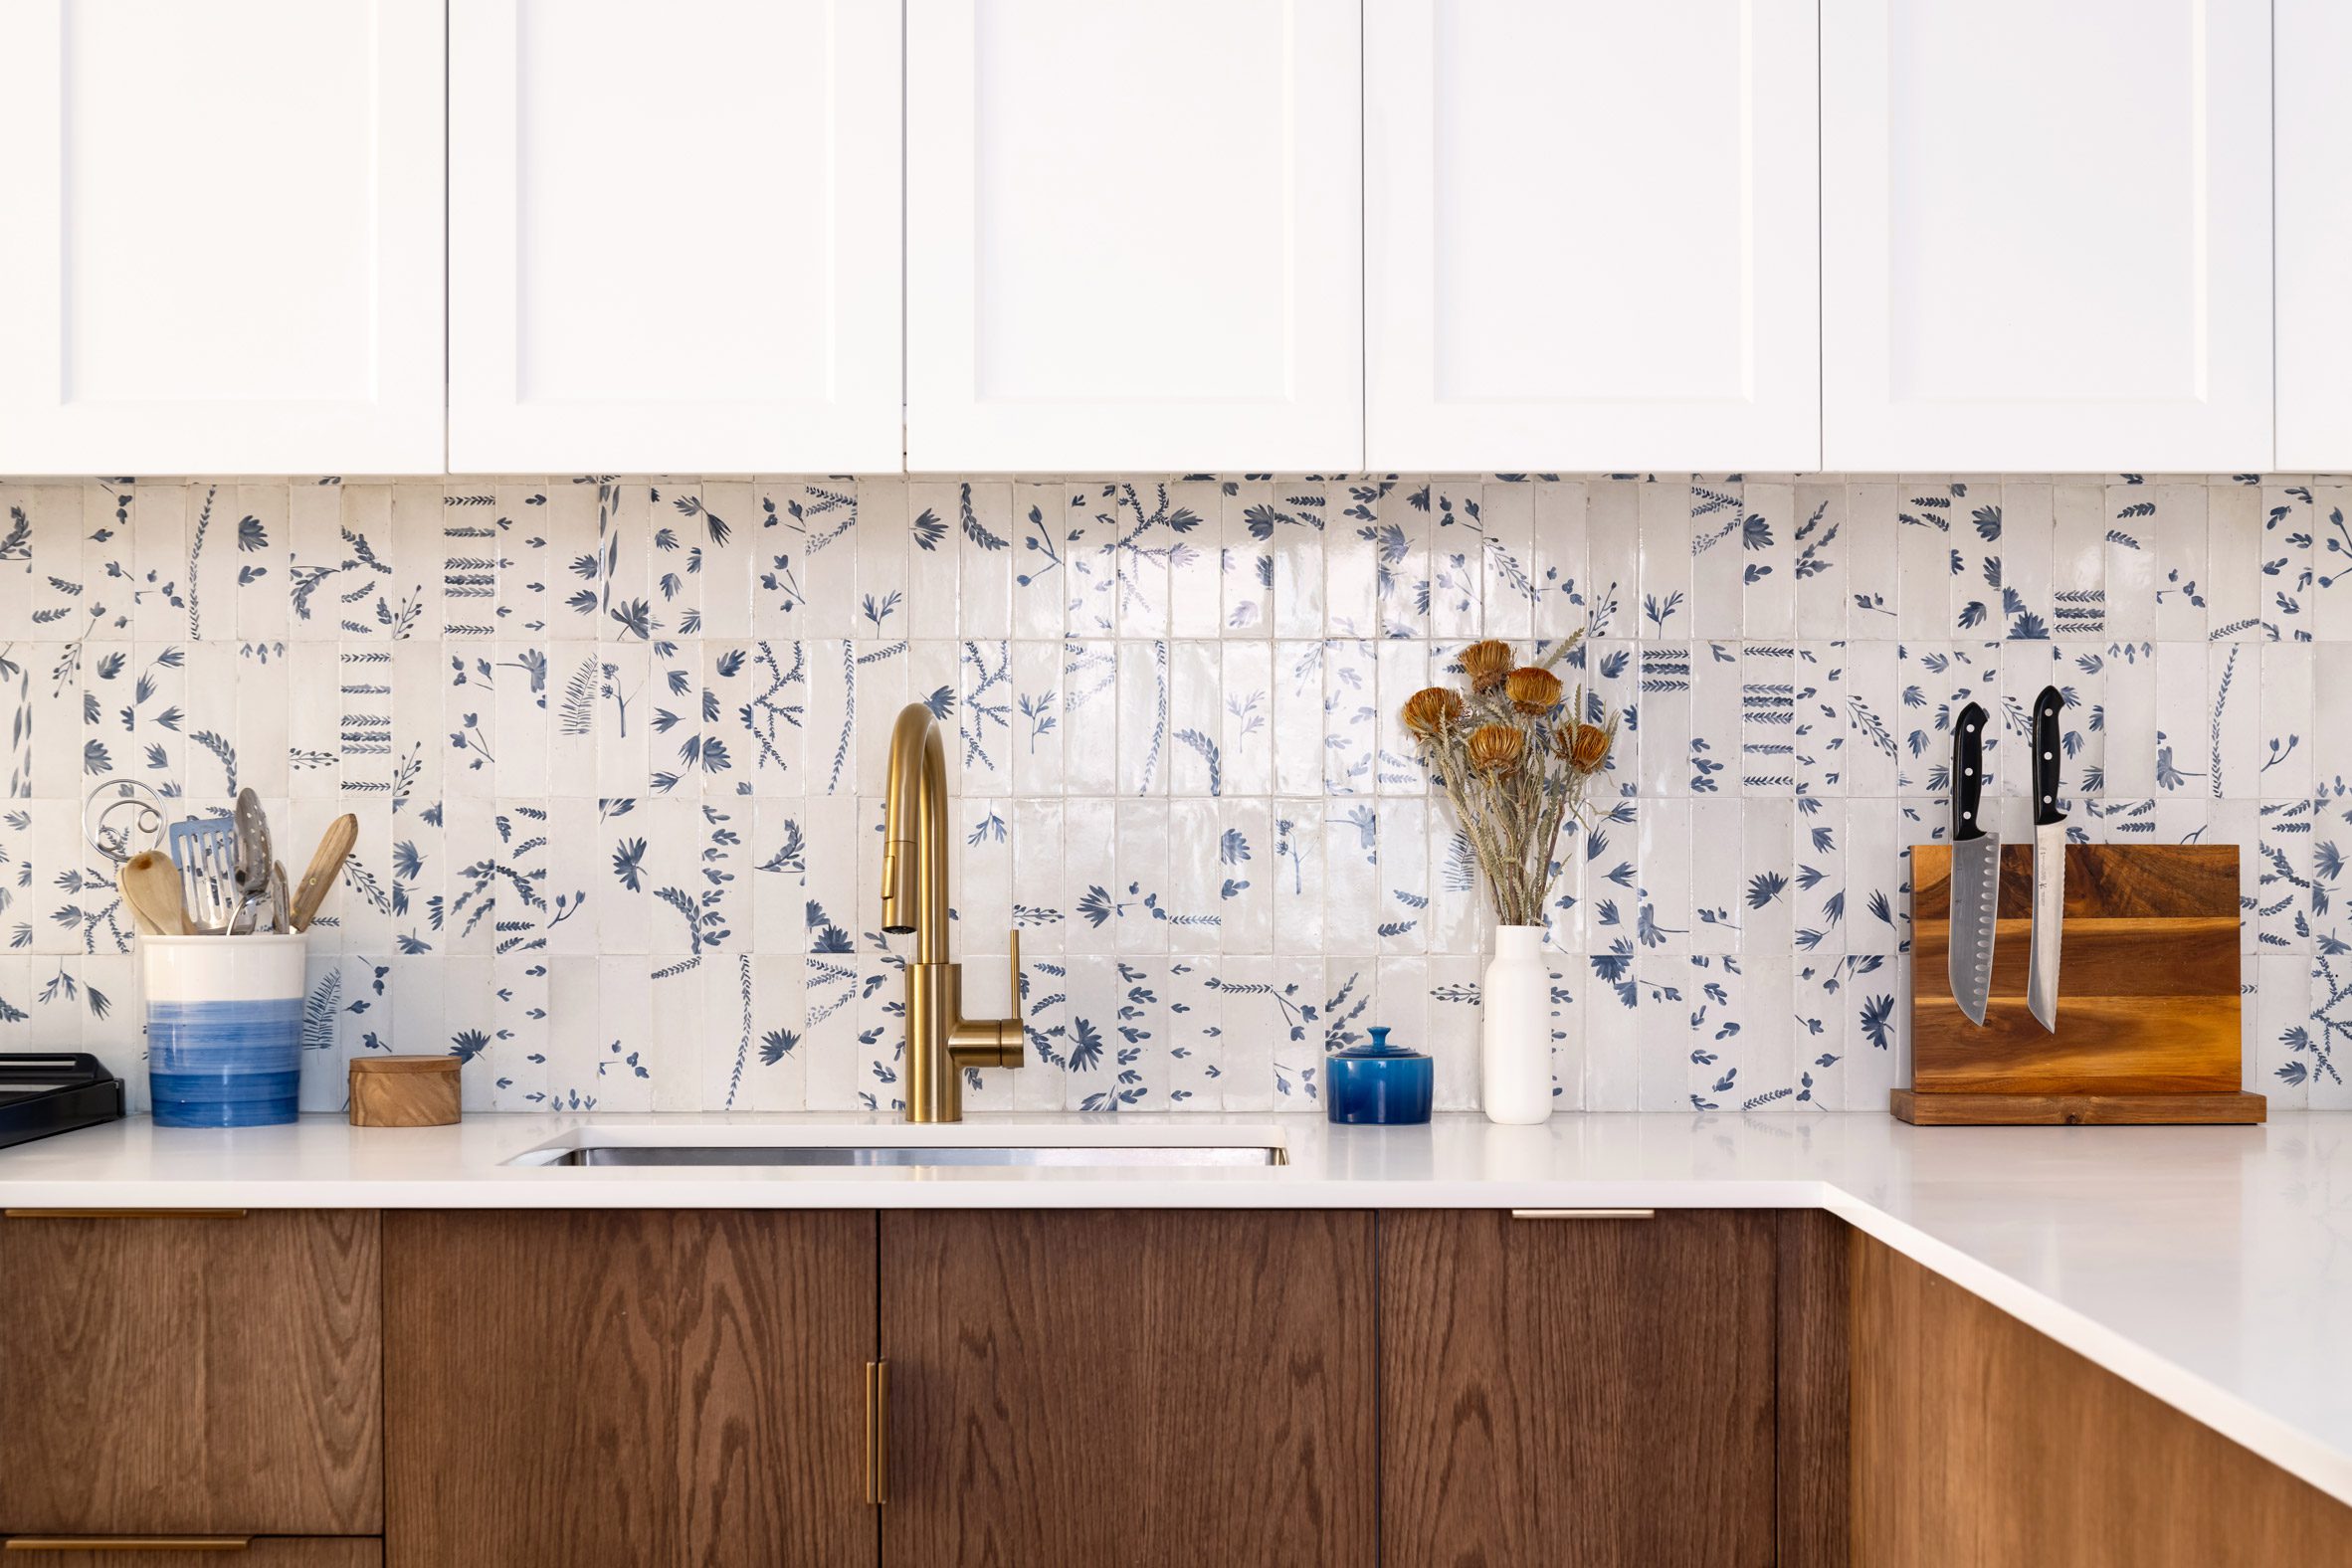 Kitchen with white upper cabinets, blue and white tiled backsplash, and dark oak lower cabinets